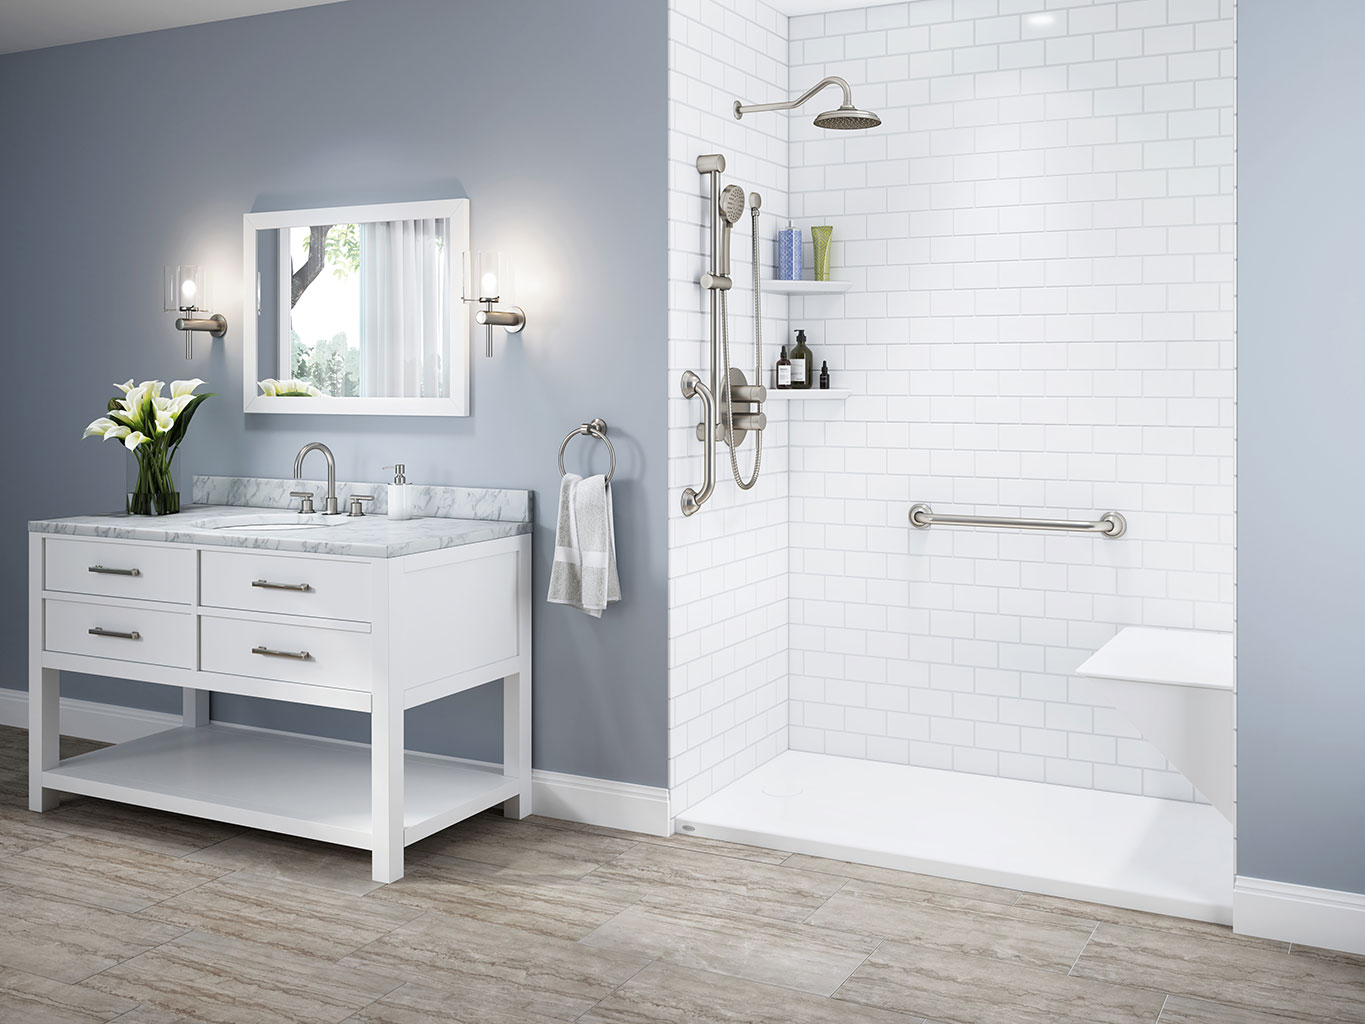 How to Make Your Bathroom Safer: Bathroom Modifications and Bathroom Remodels